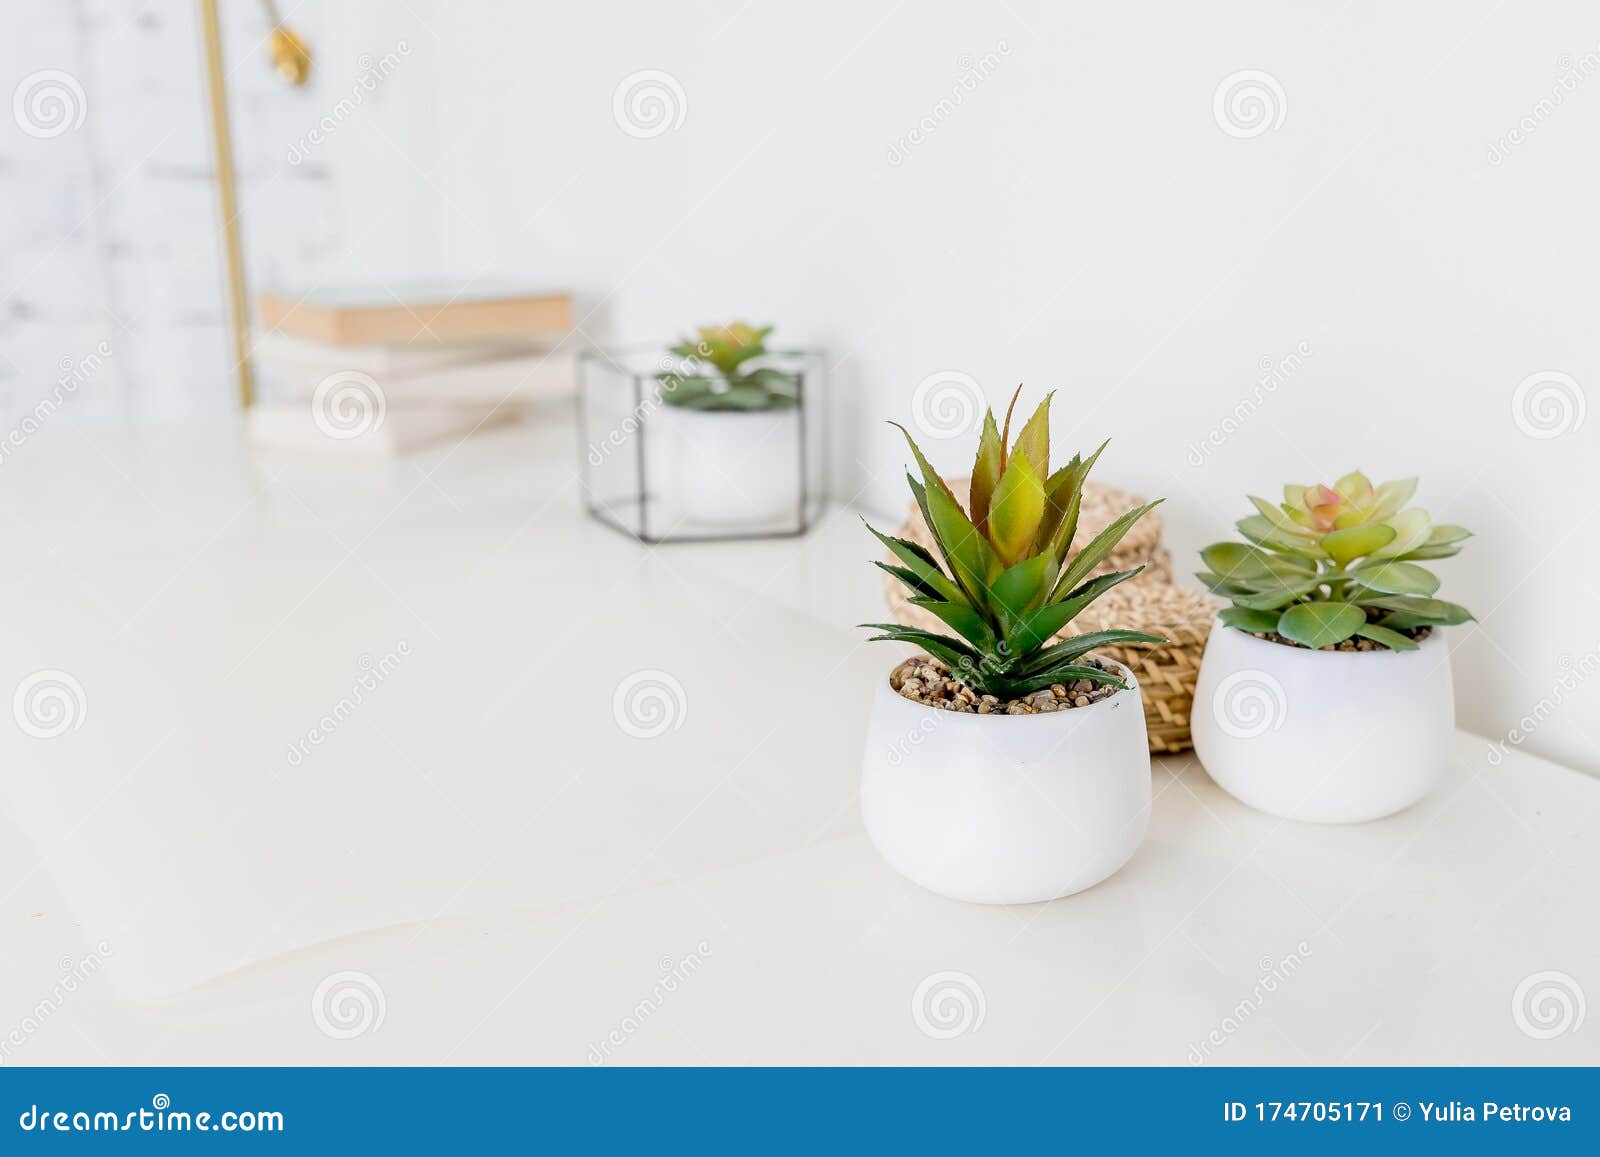 Office Or Home Office Desk With Decorative Plants And Cactus